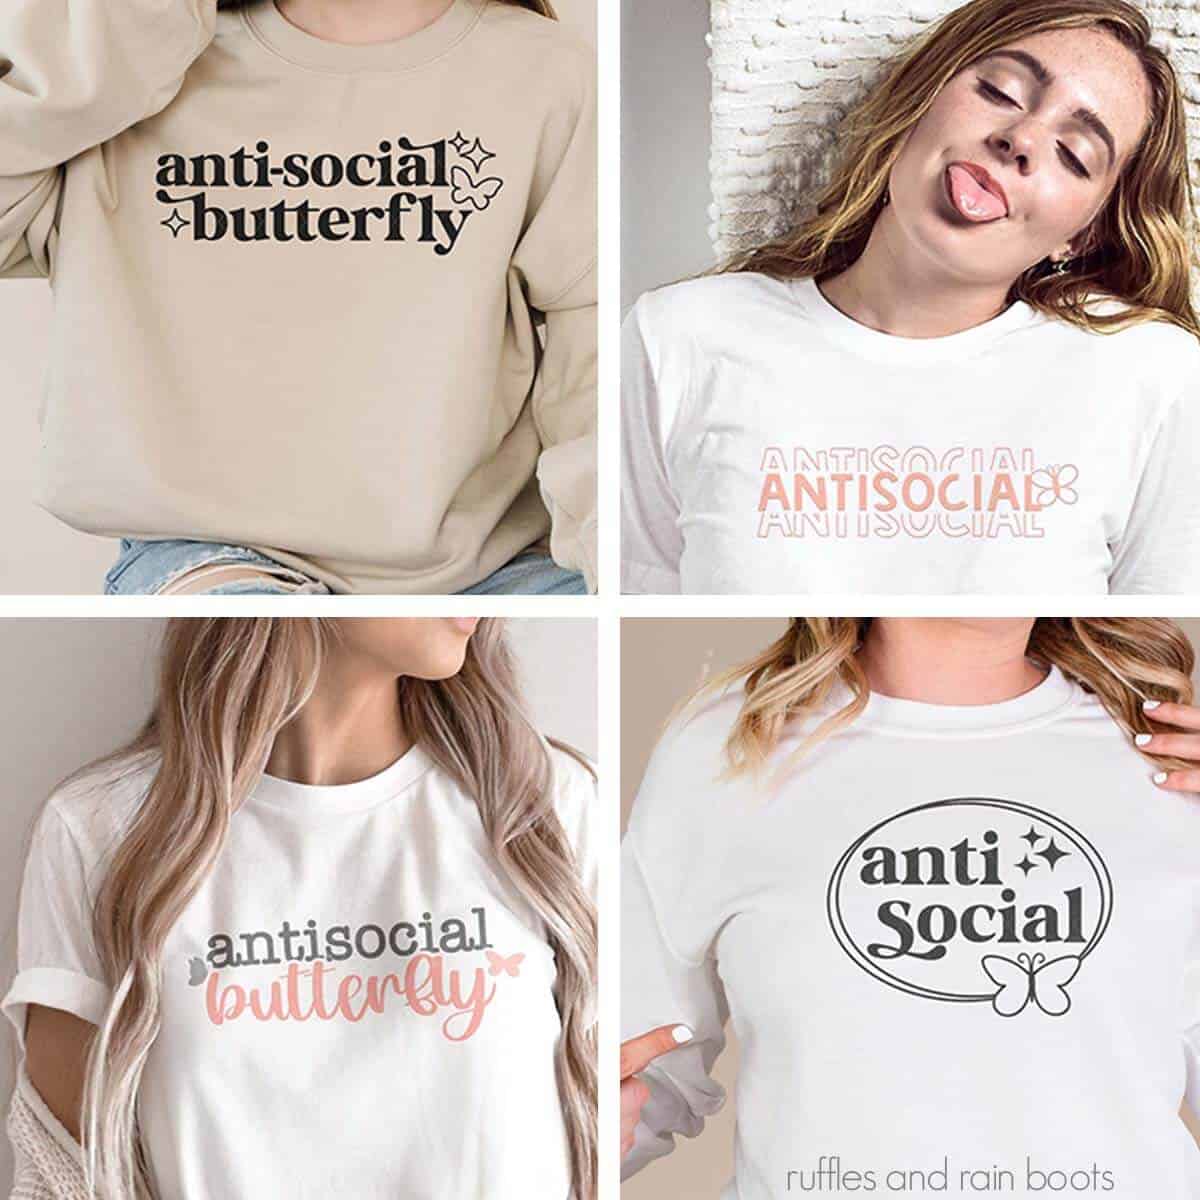 Square four image collage of women wearing shirts and sweatshirts which read antisocial butterfly.